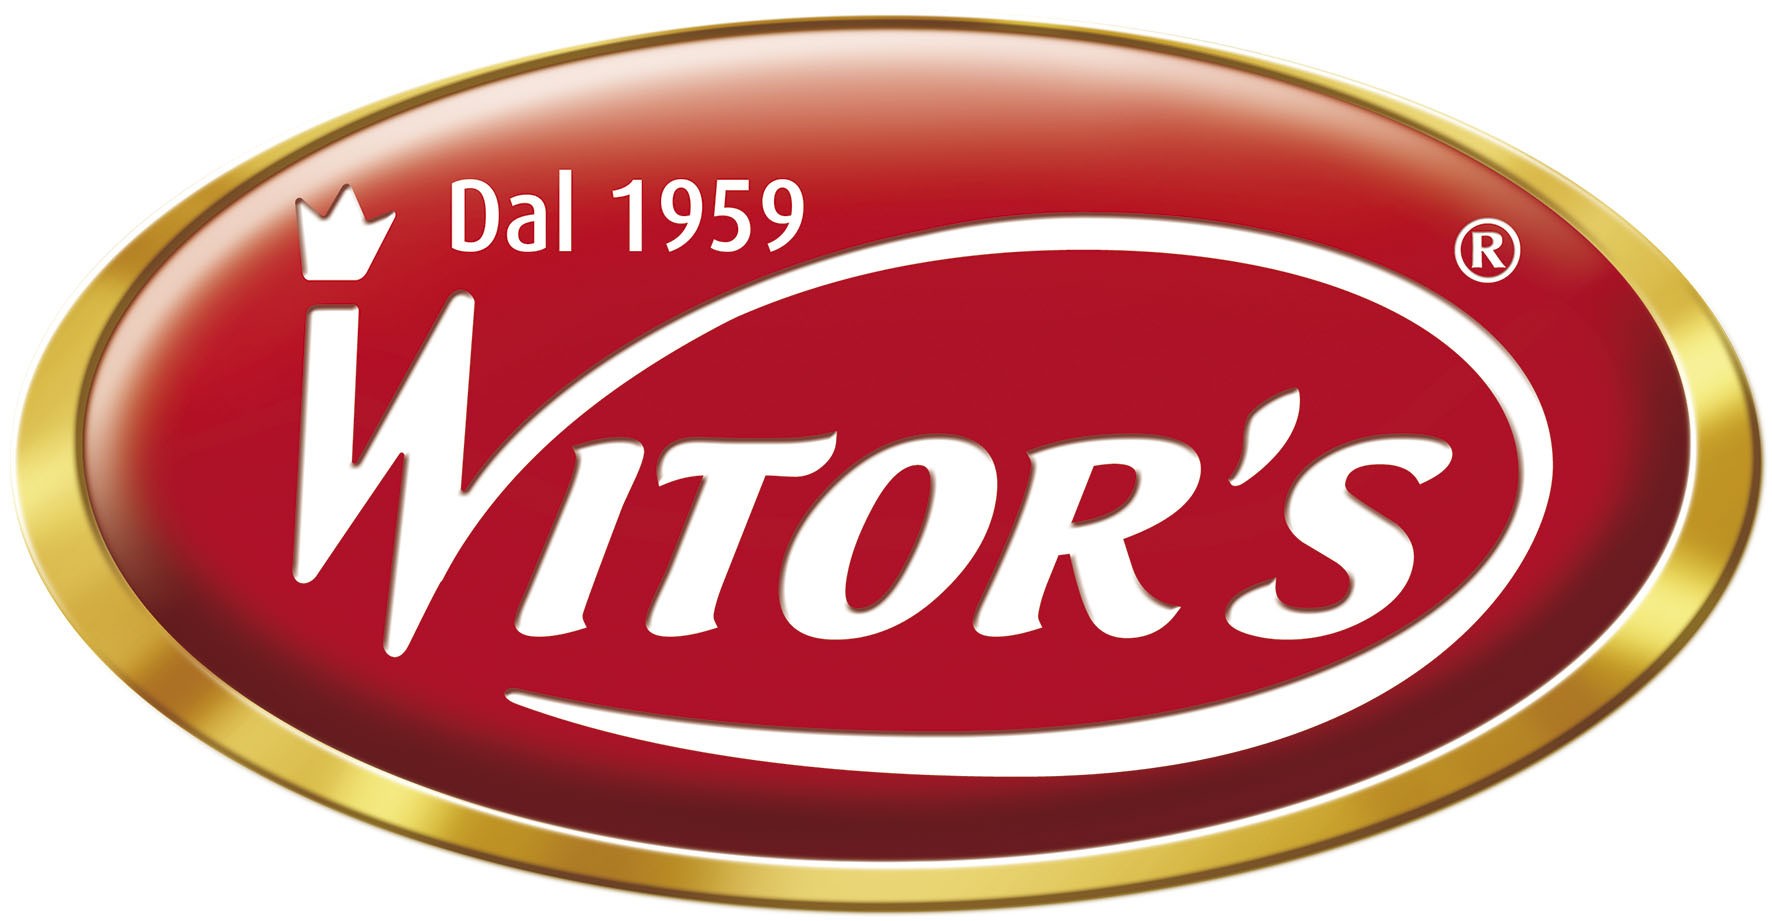 witor's logo